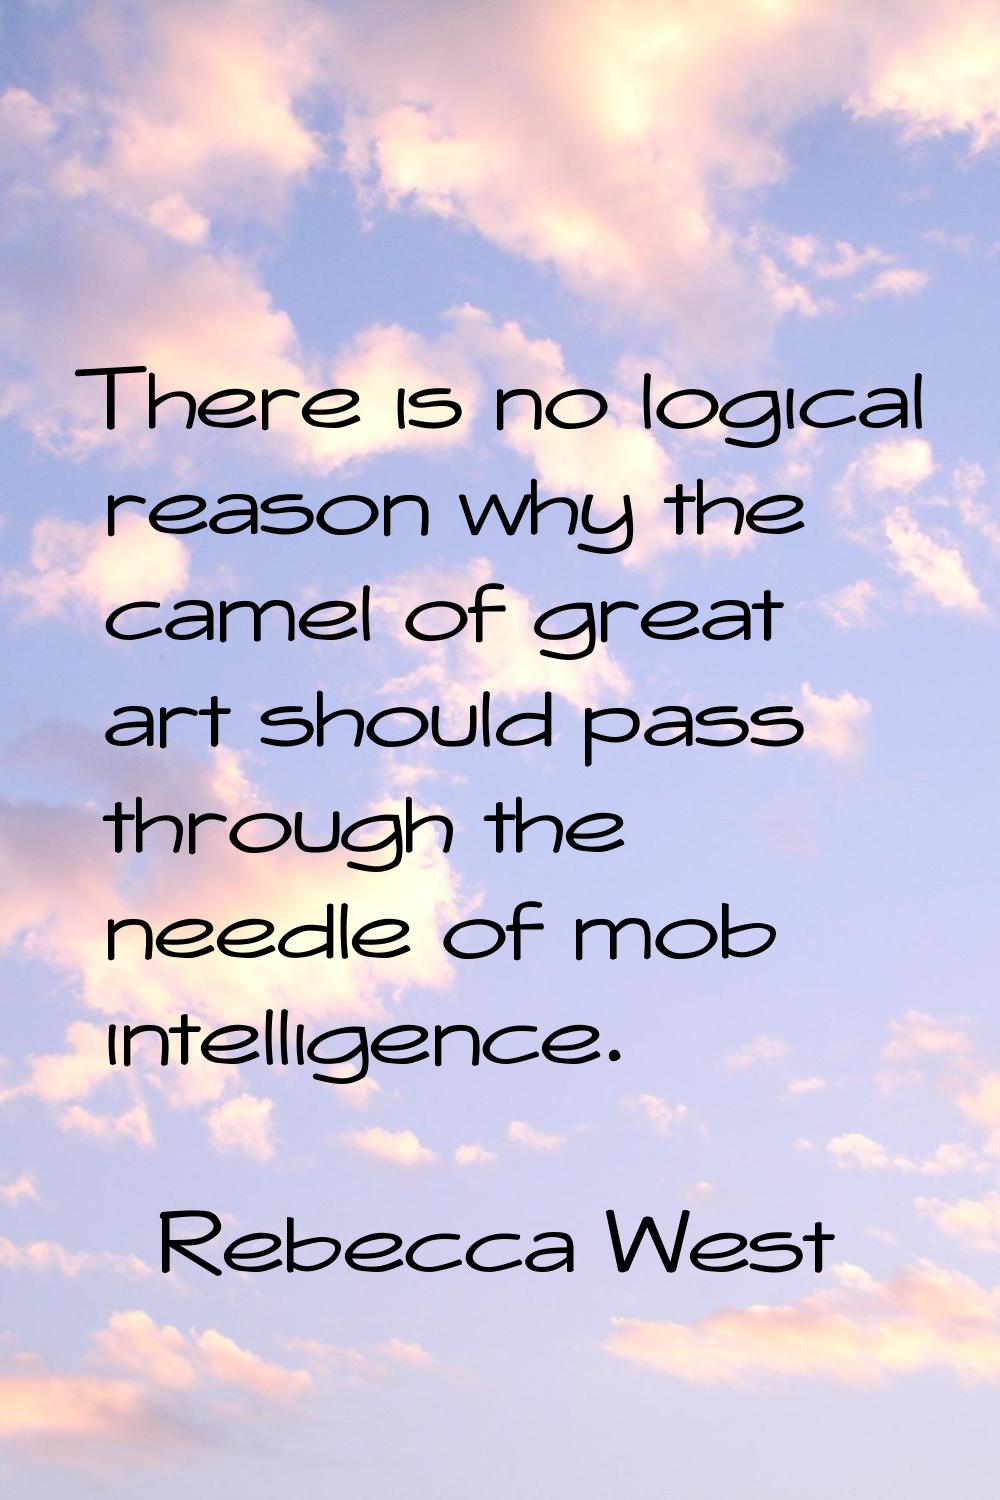 There is no logical reason why the camel of great art should pass through the needle of mob intelli